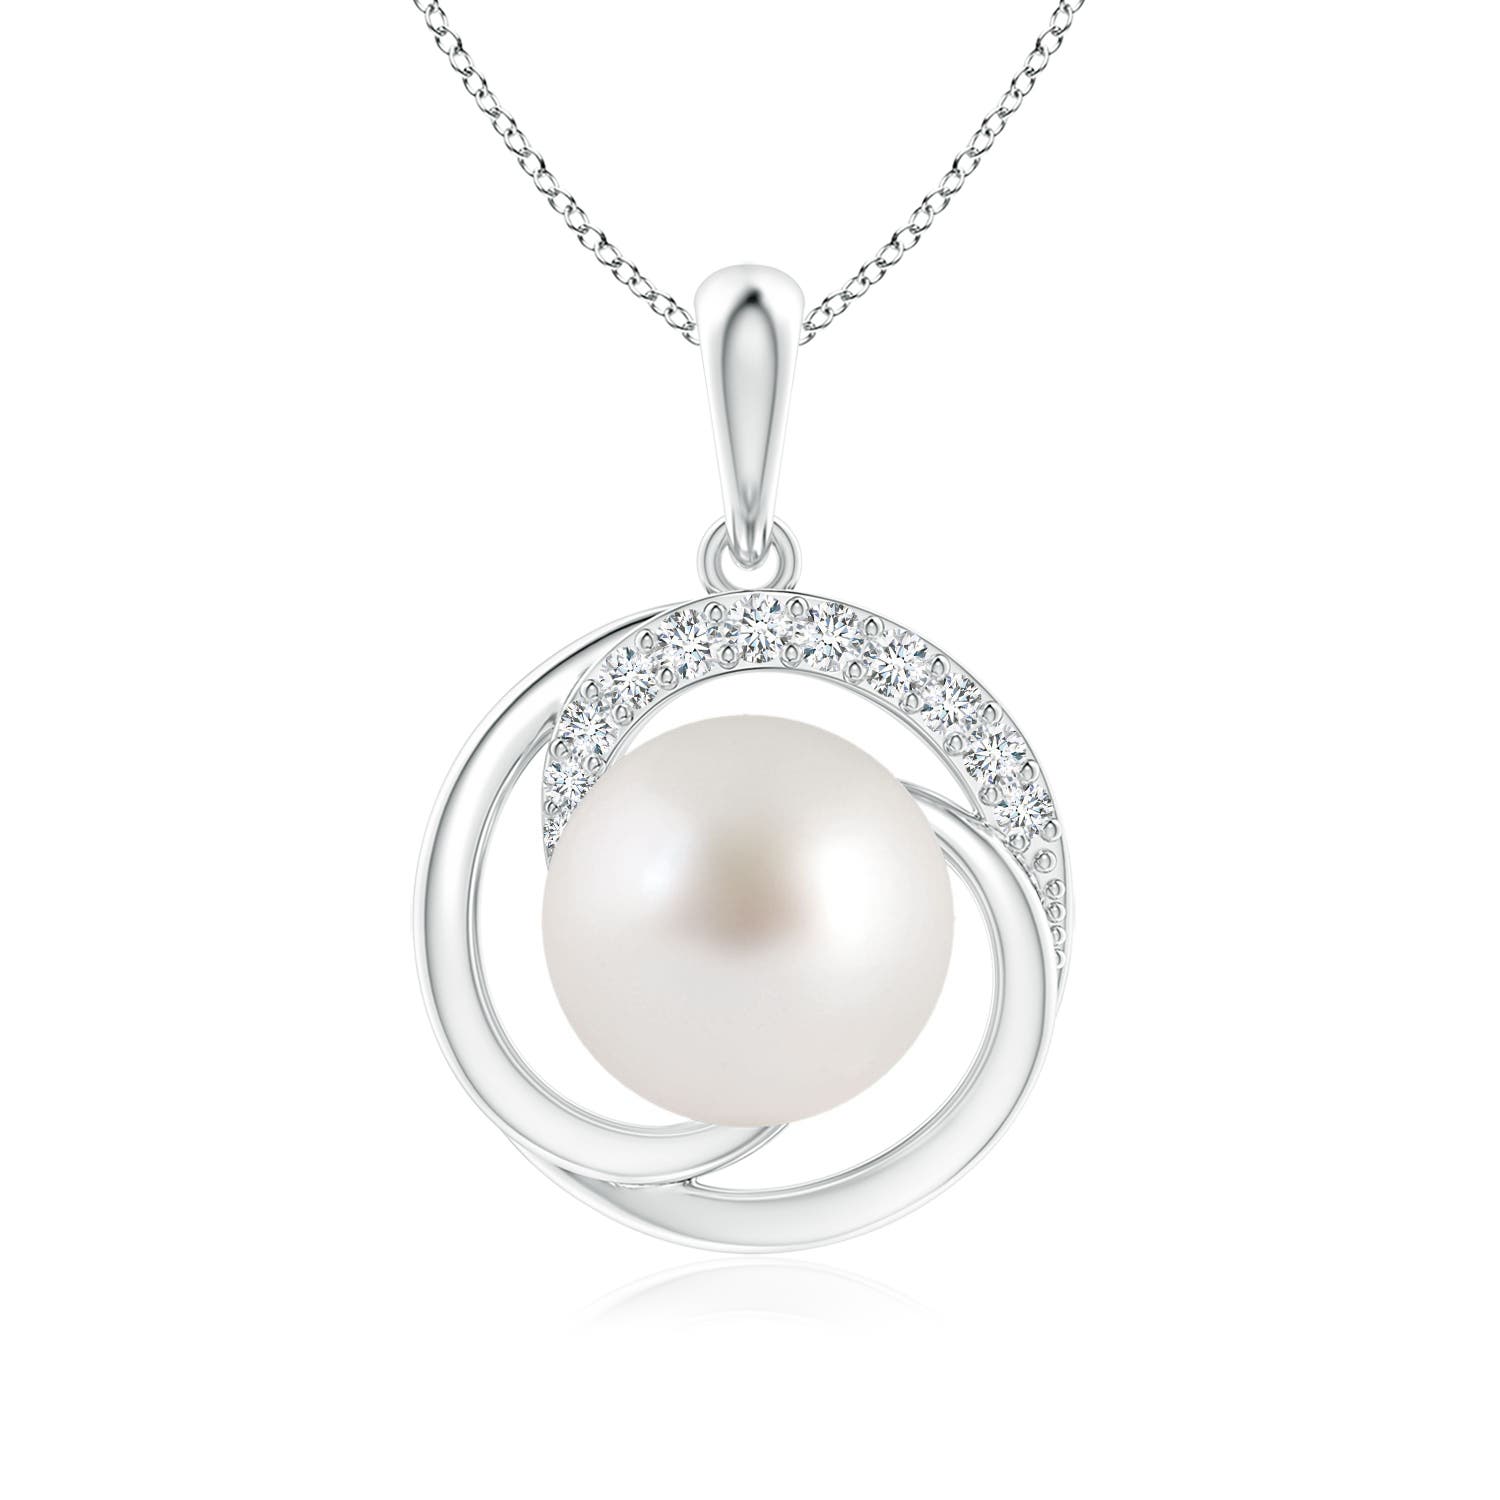 AAA - South Sea Cultured Pearl / 5.36 CT / 14 KT White Gold